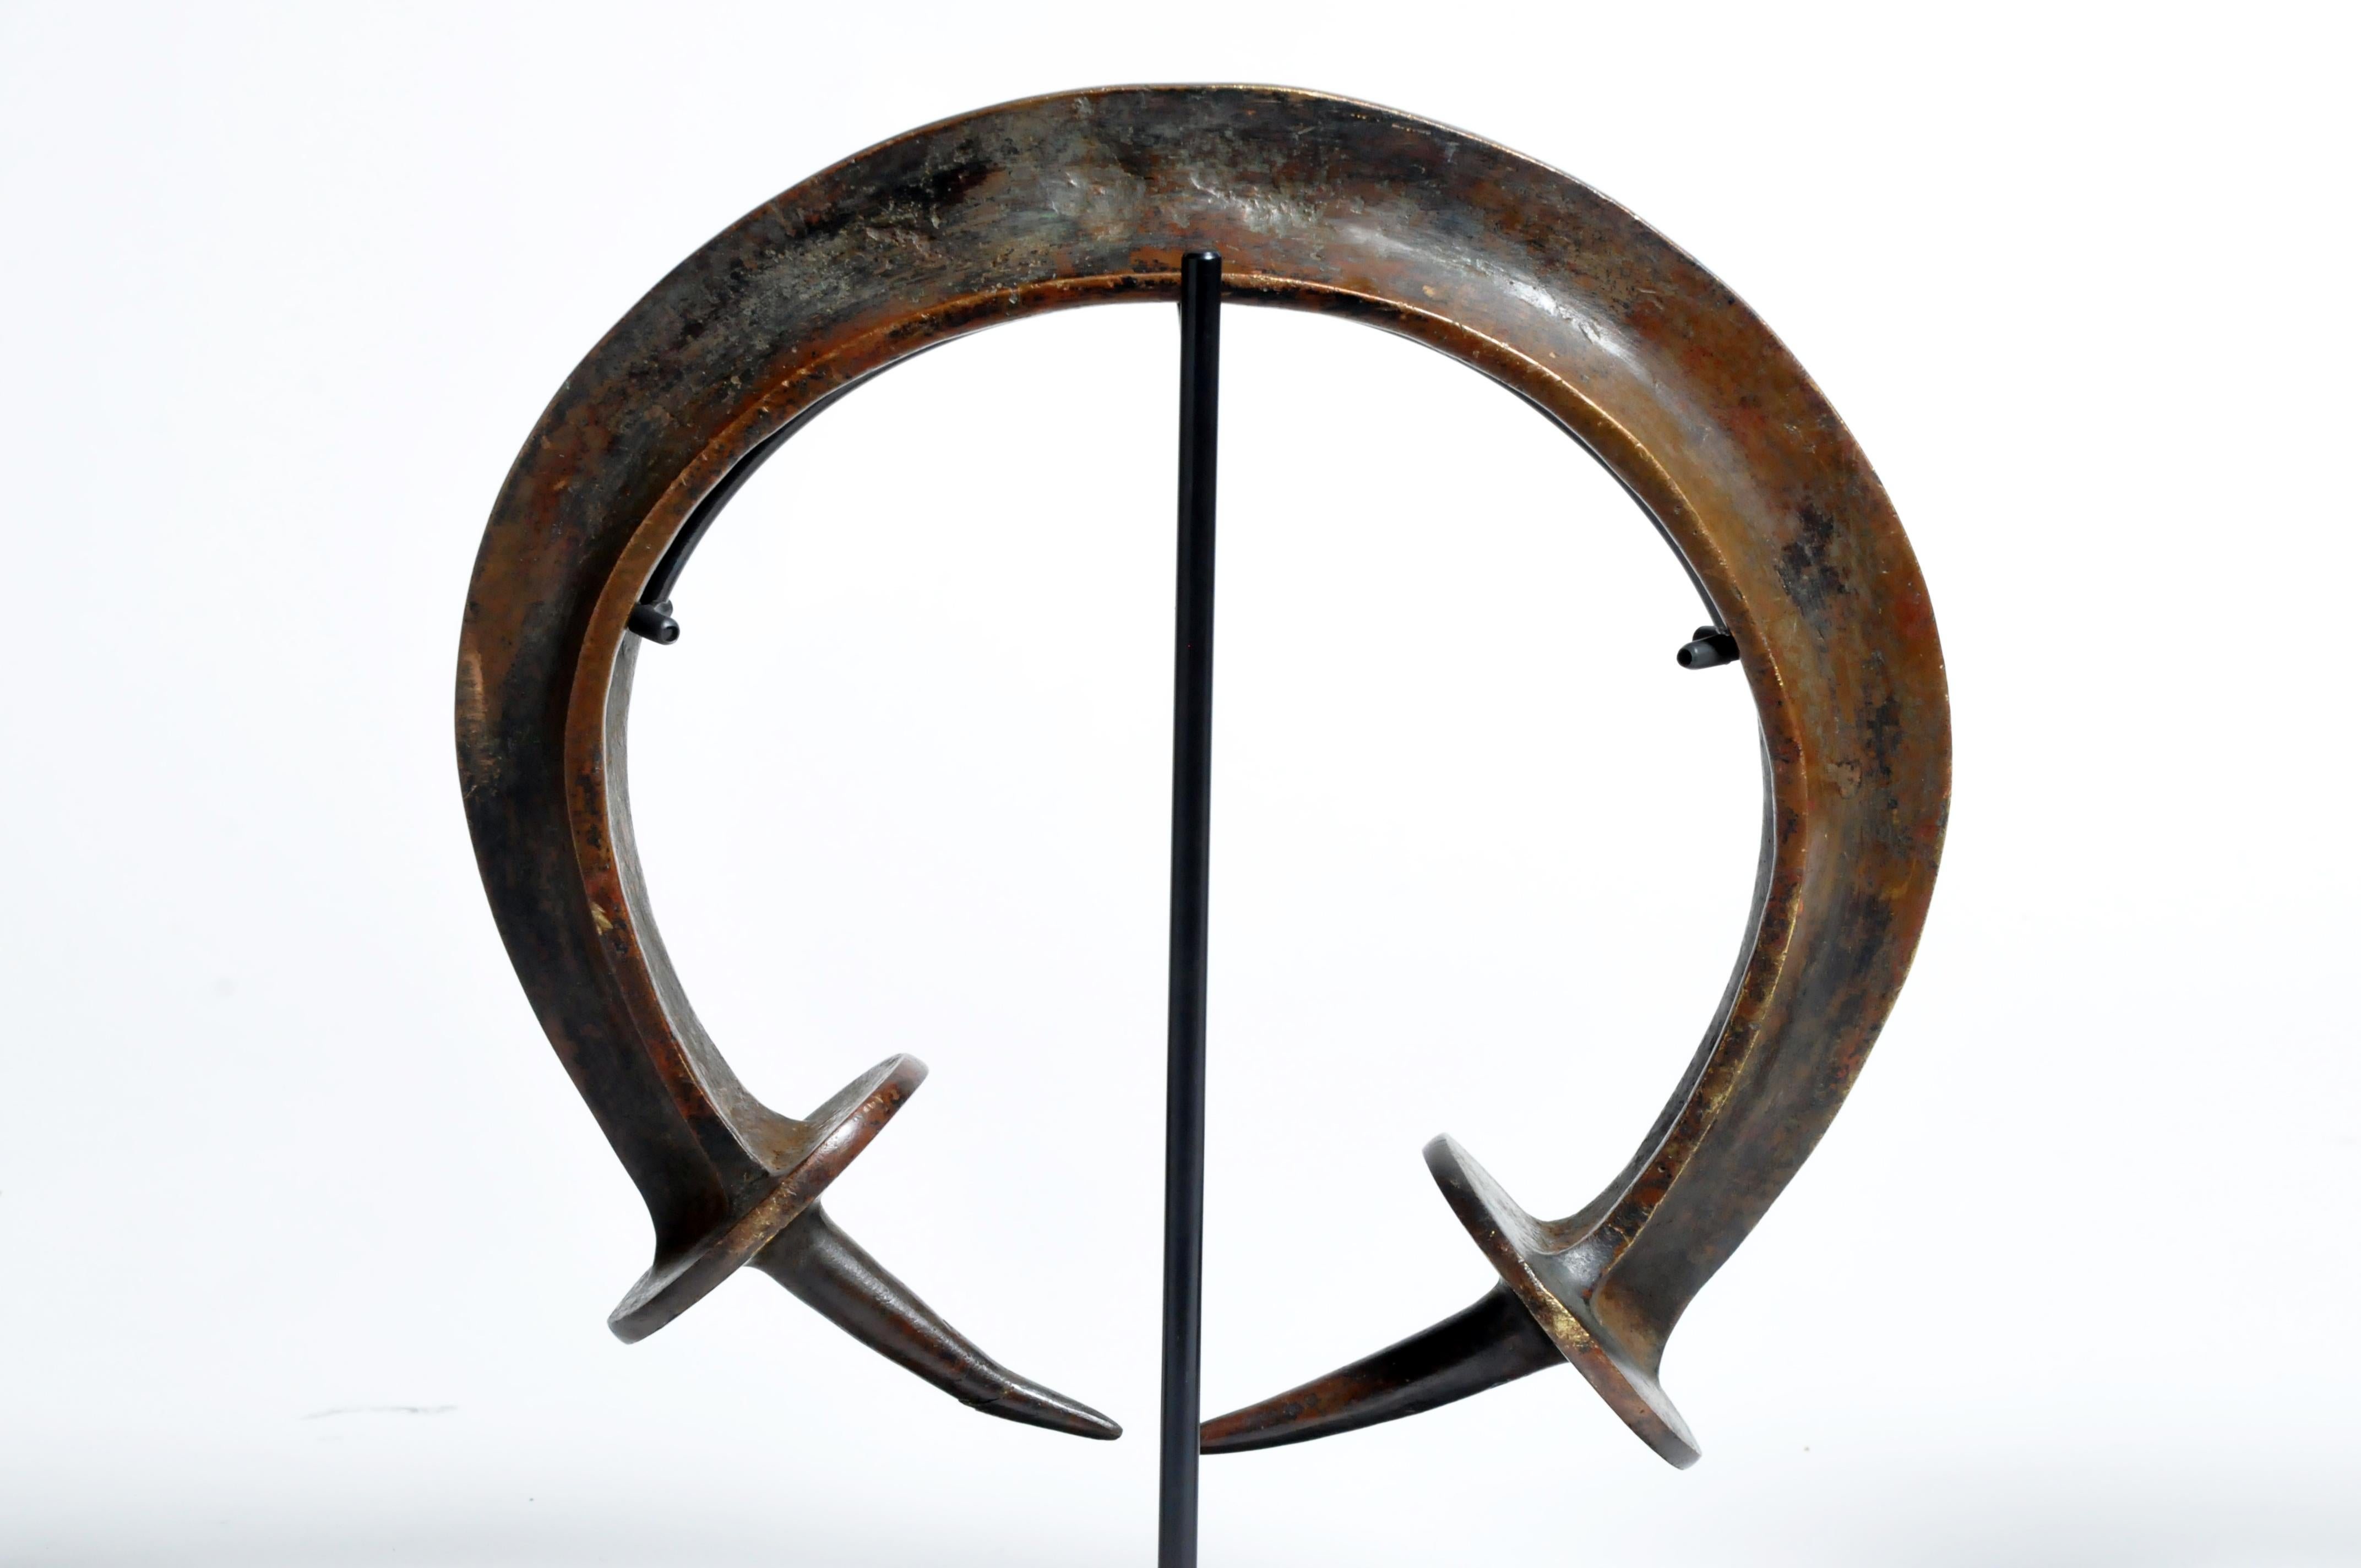 This Yoruba style neck ring was cast from copper alloy using the lost wax method. The Yoruba are found principally in Nigeria and Benin. The piece dates to the mid-20th century. Metal mounting is included.